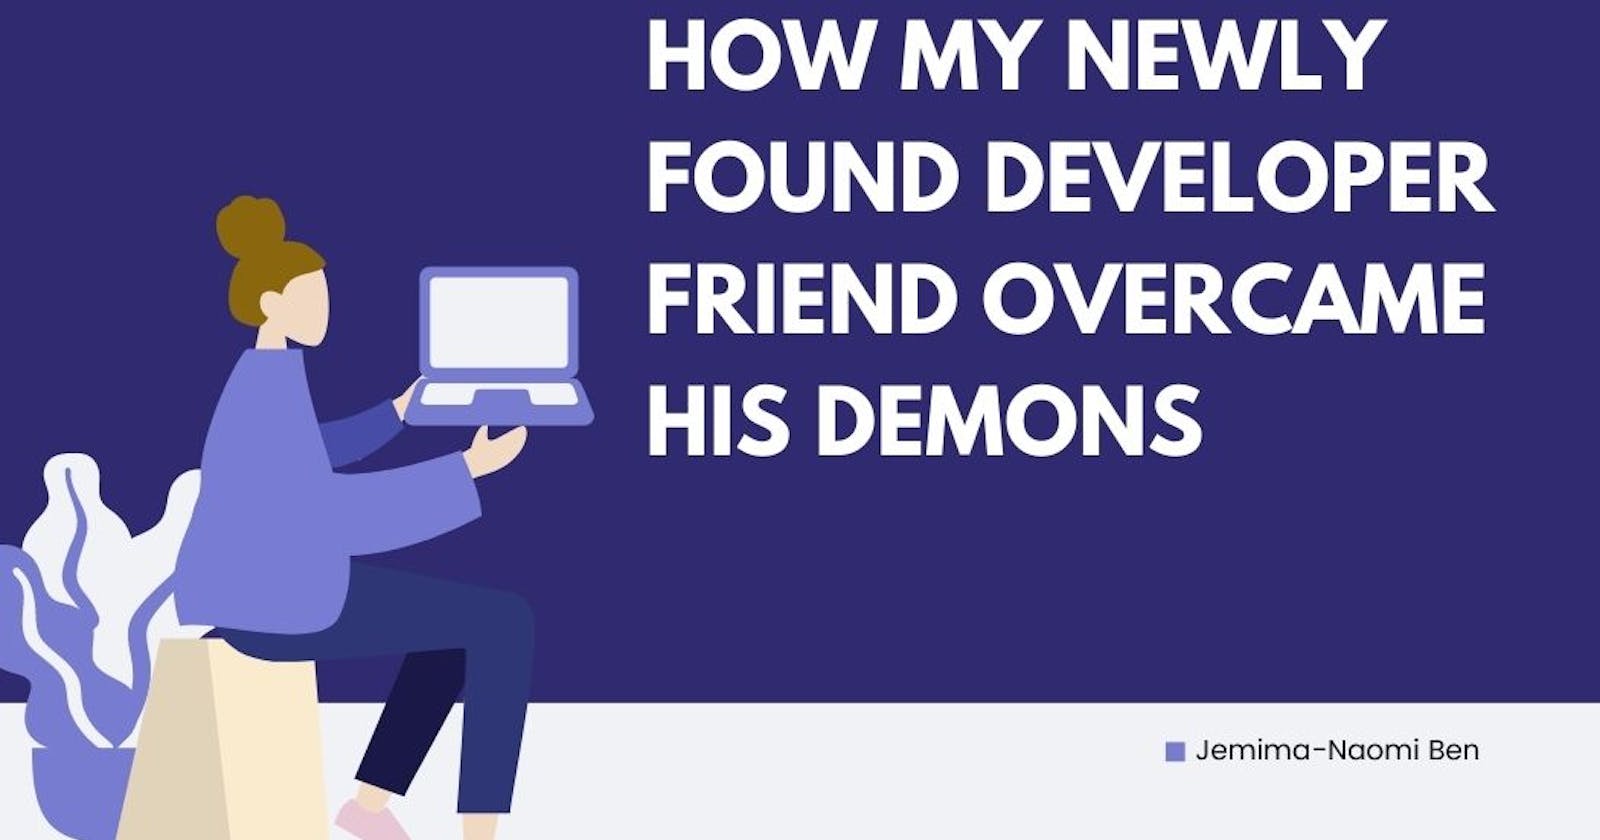 How My Newly Found Developer Friend Overcame His Demons